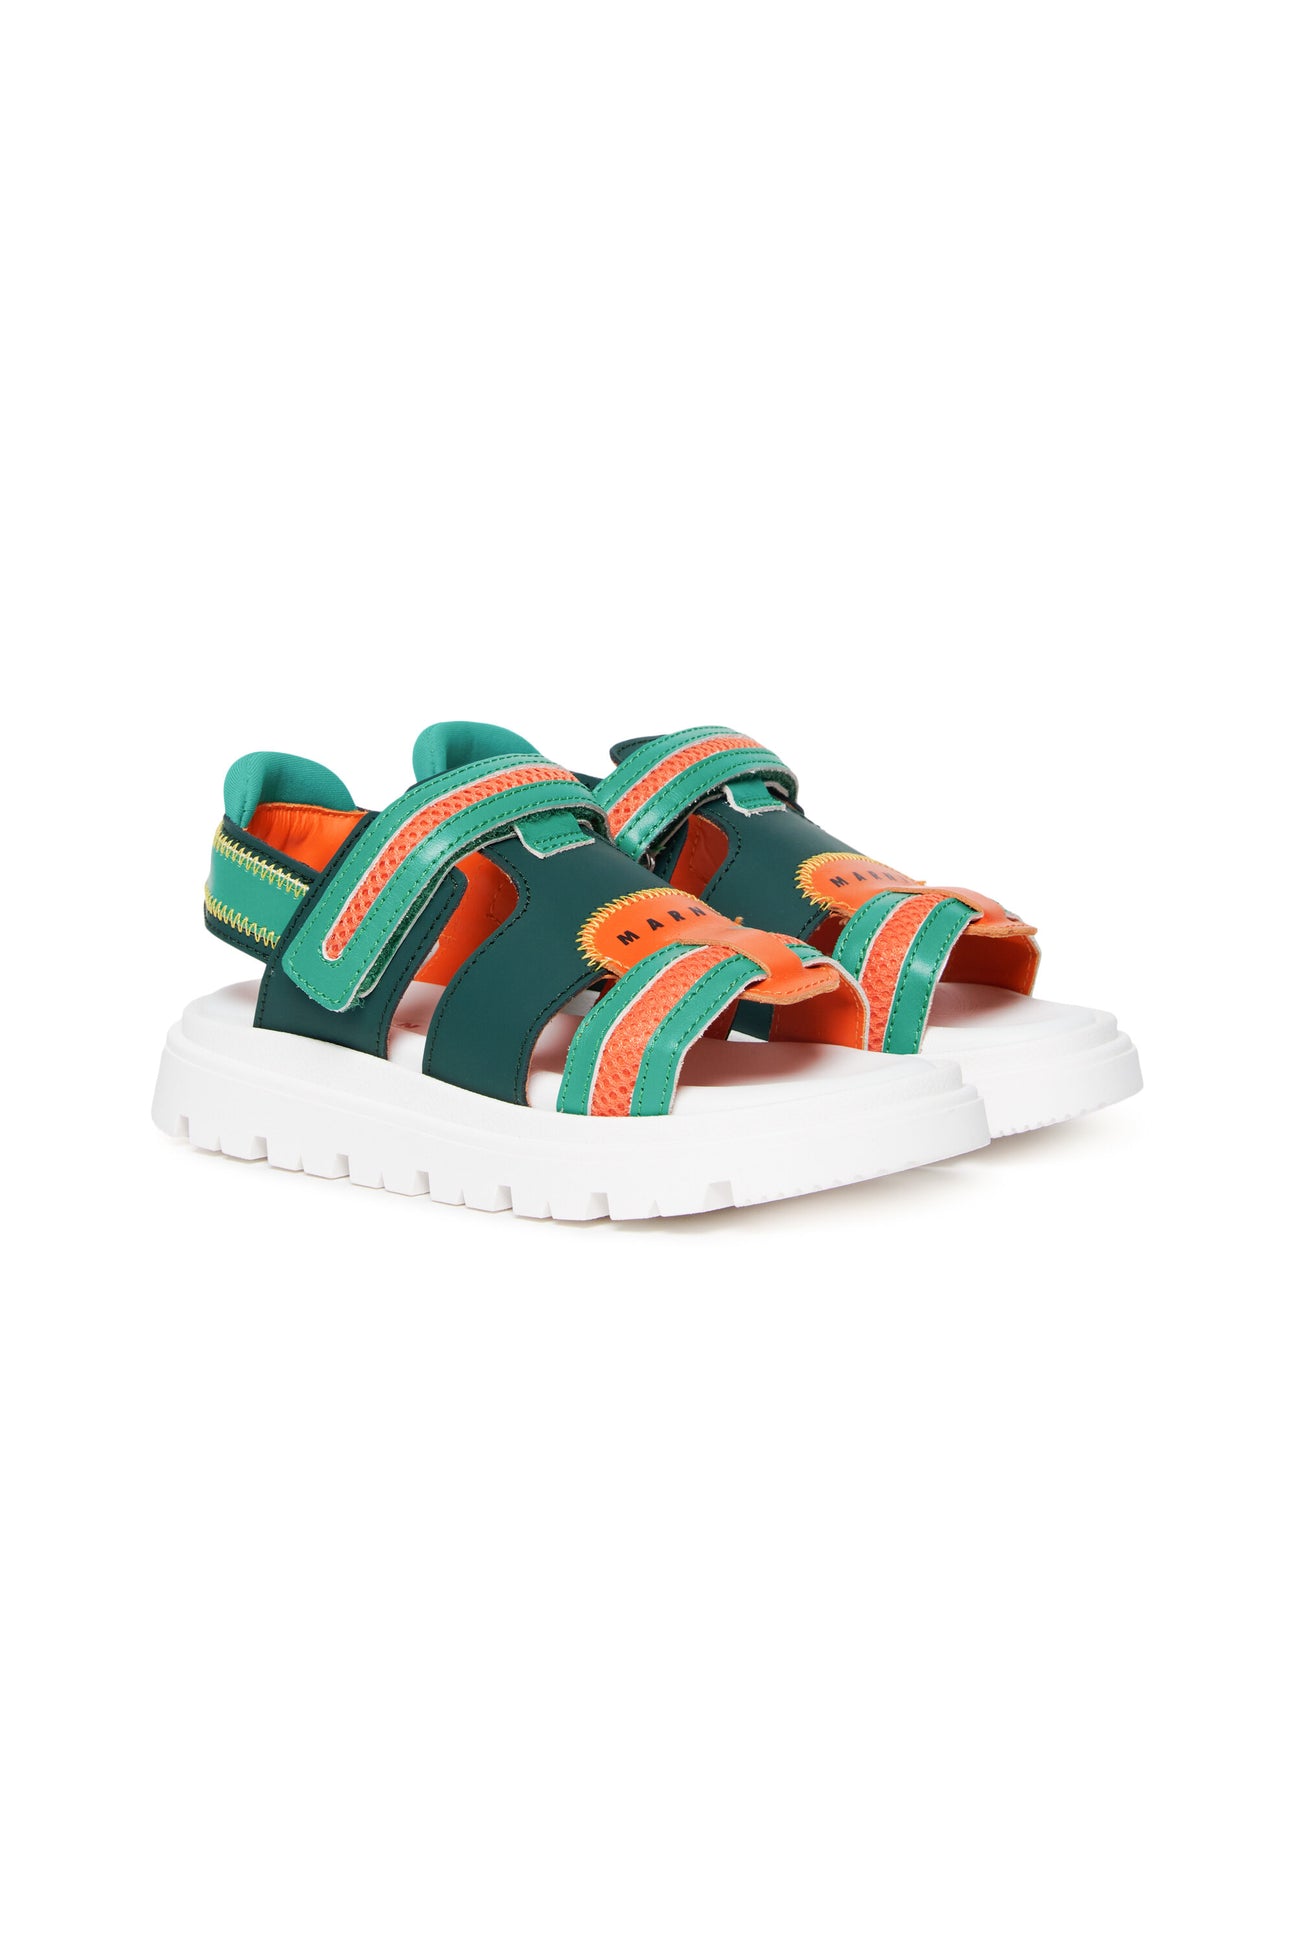 Dsquared2 touch-strap sandals - Green